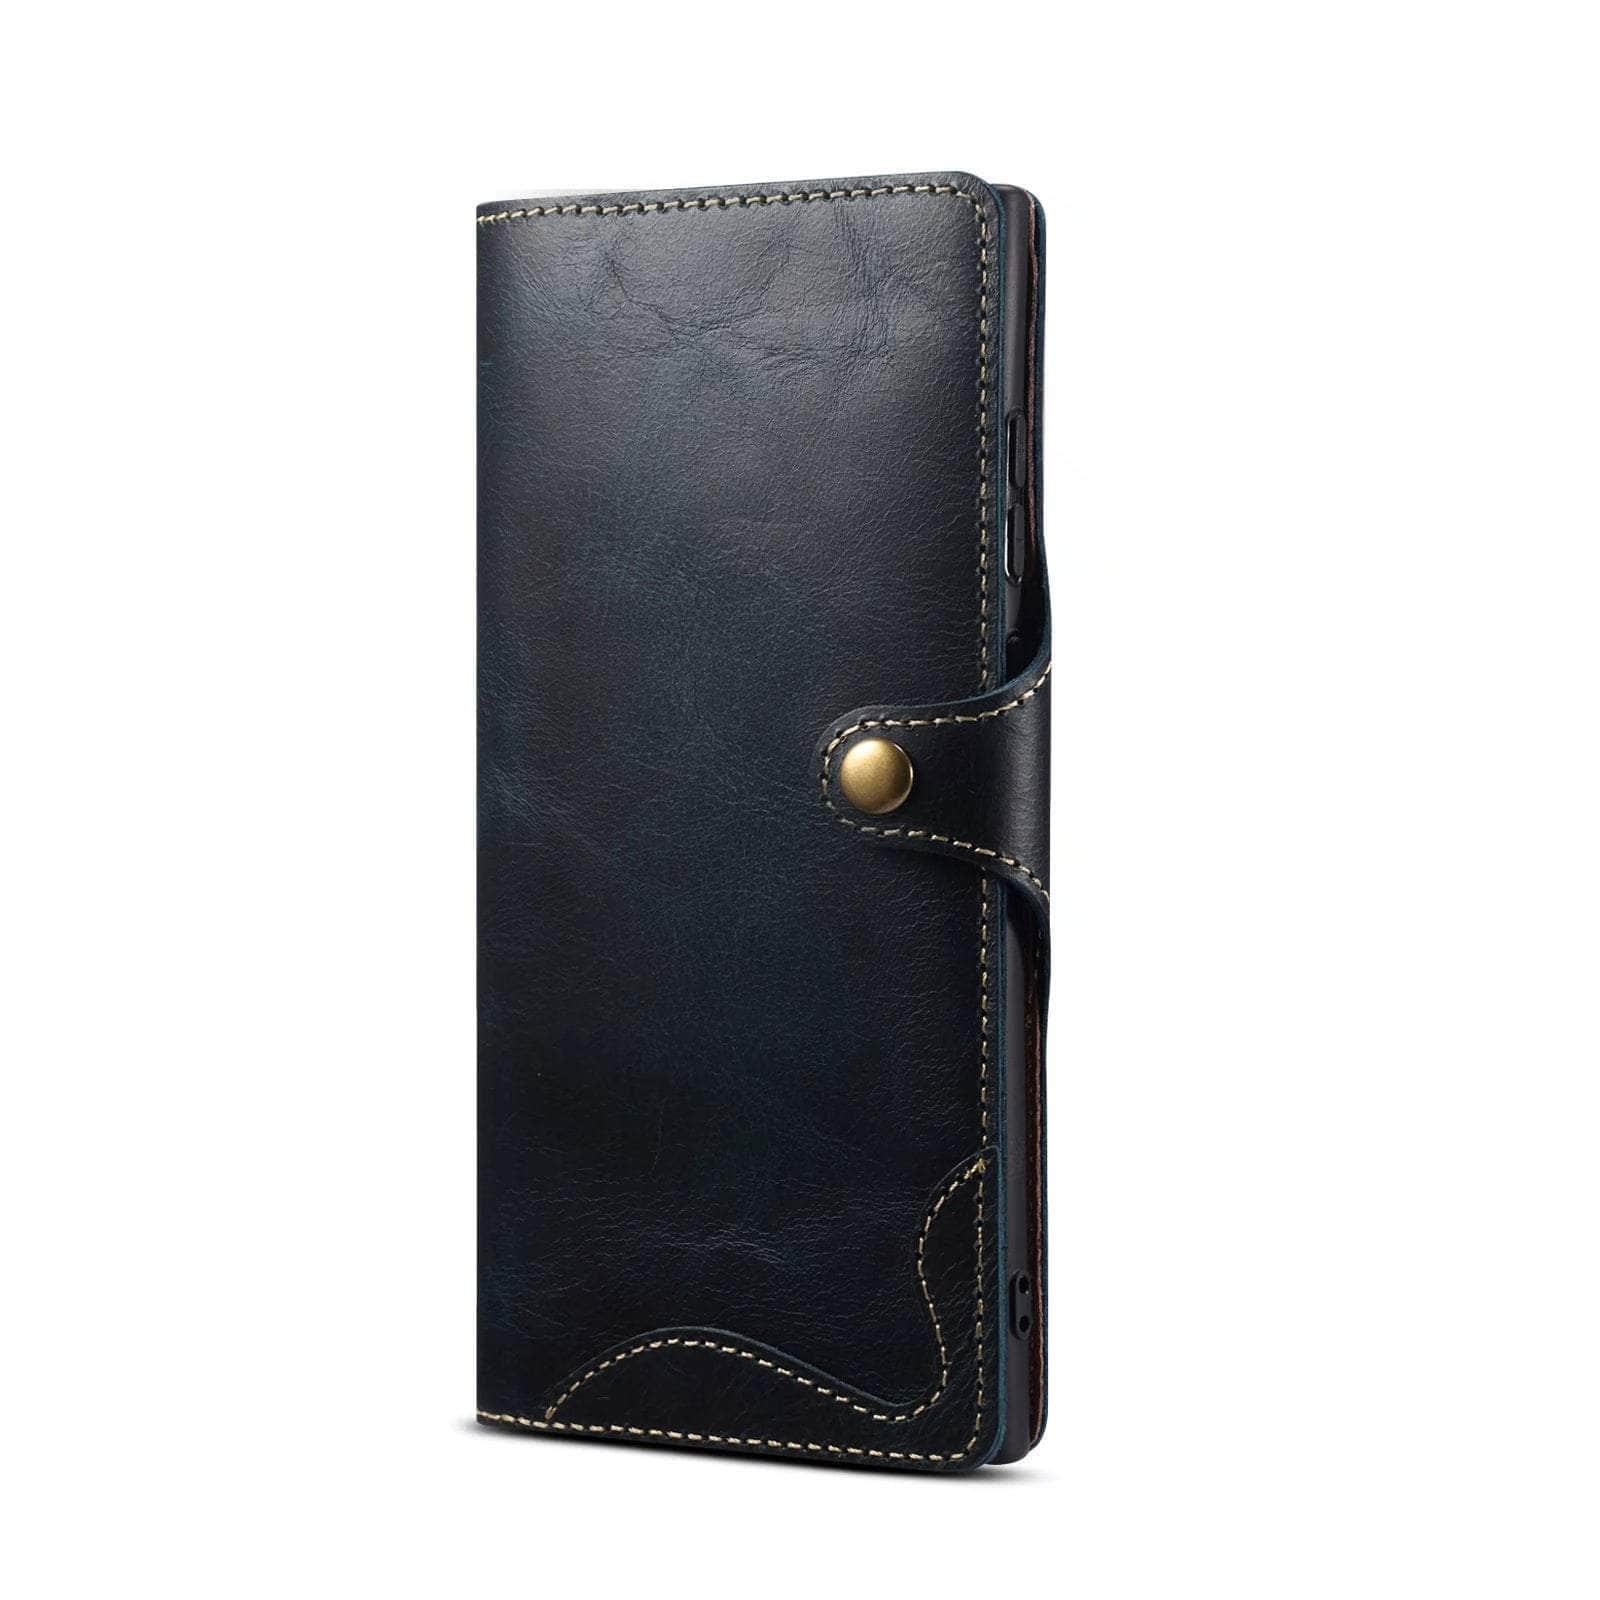 Casebuddy Real Cowhide Galaxy S23 FE Leather Case